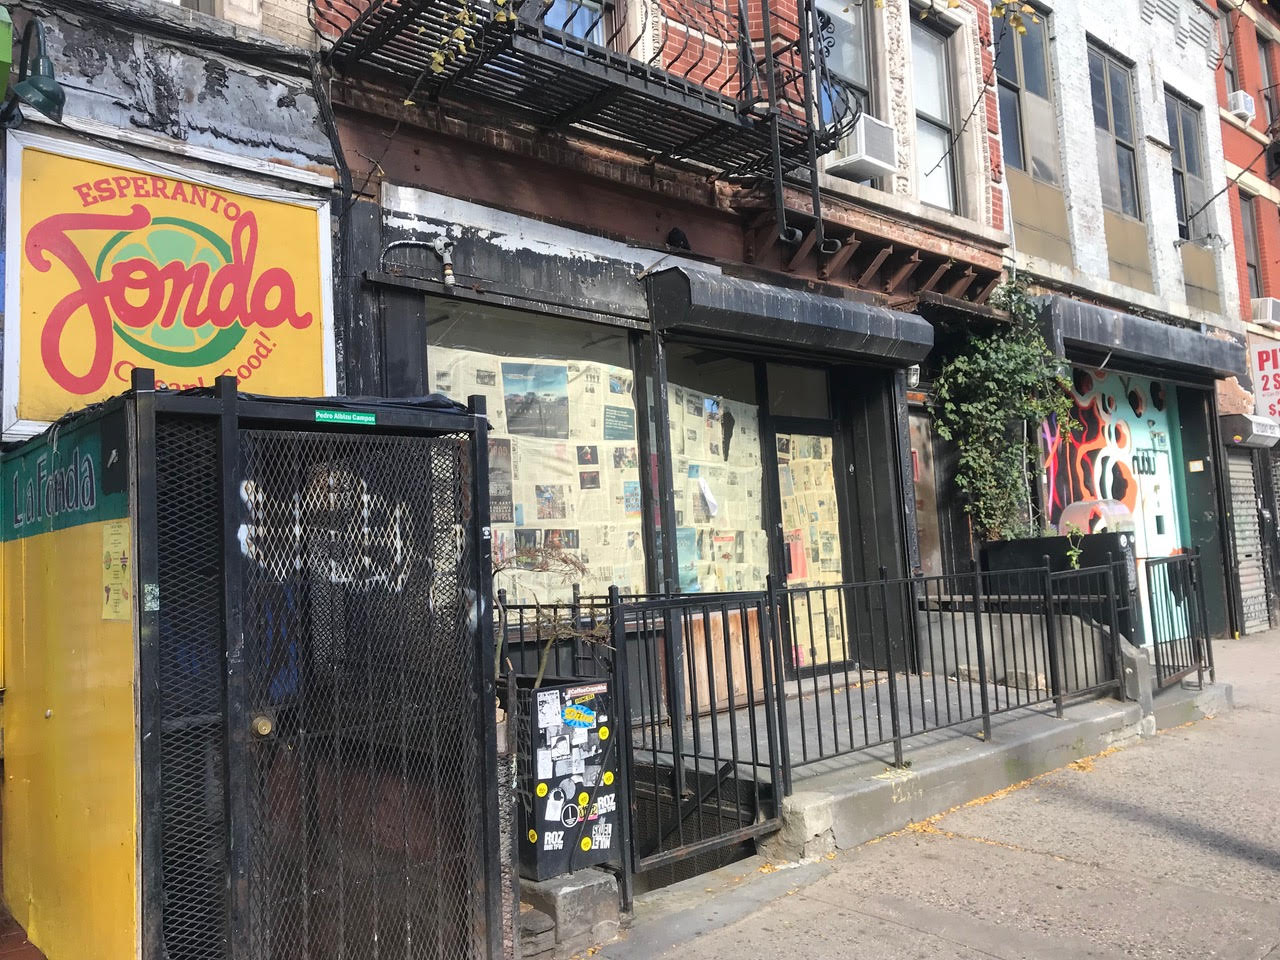 Vacant Storefronts in NYC